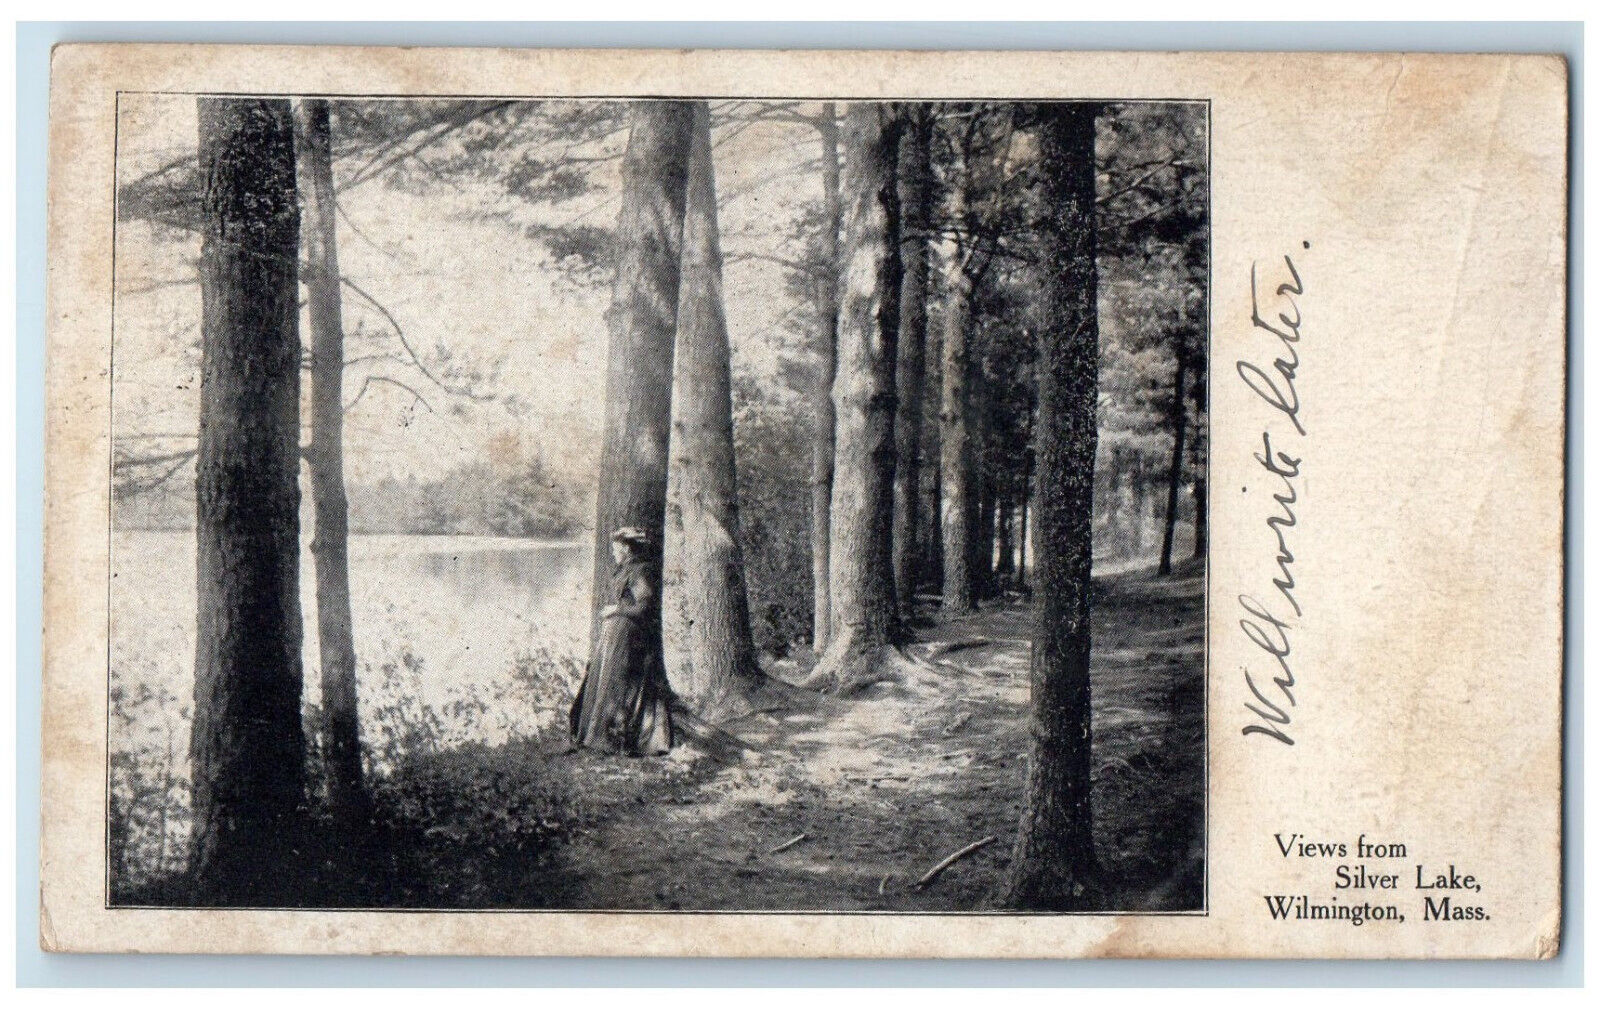 1909 Views From Silver Lake Tree-lined Wilmington Massachusetts MA Postcard